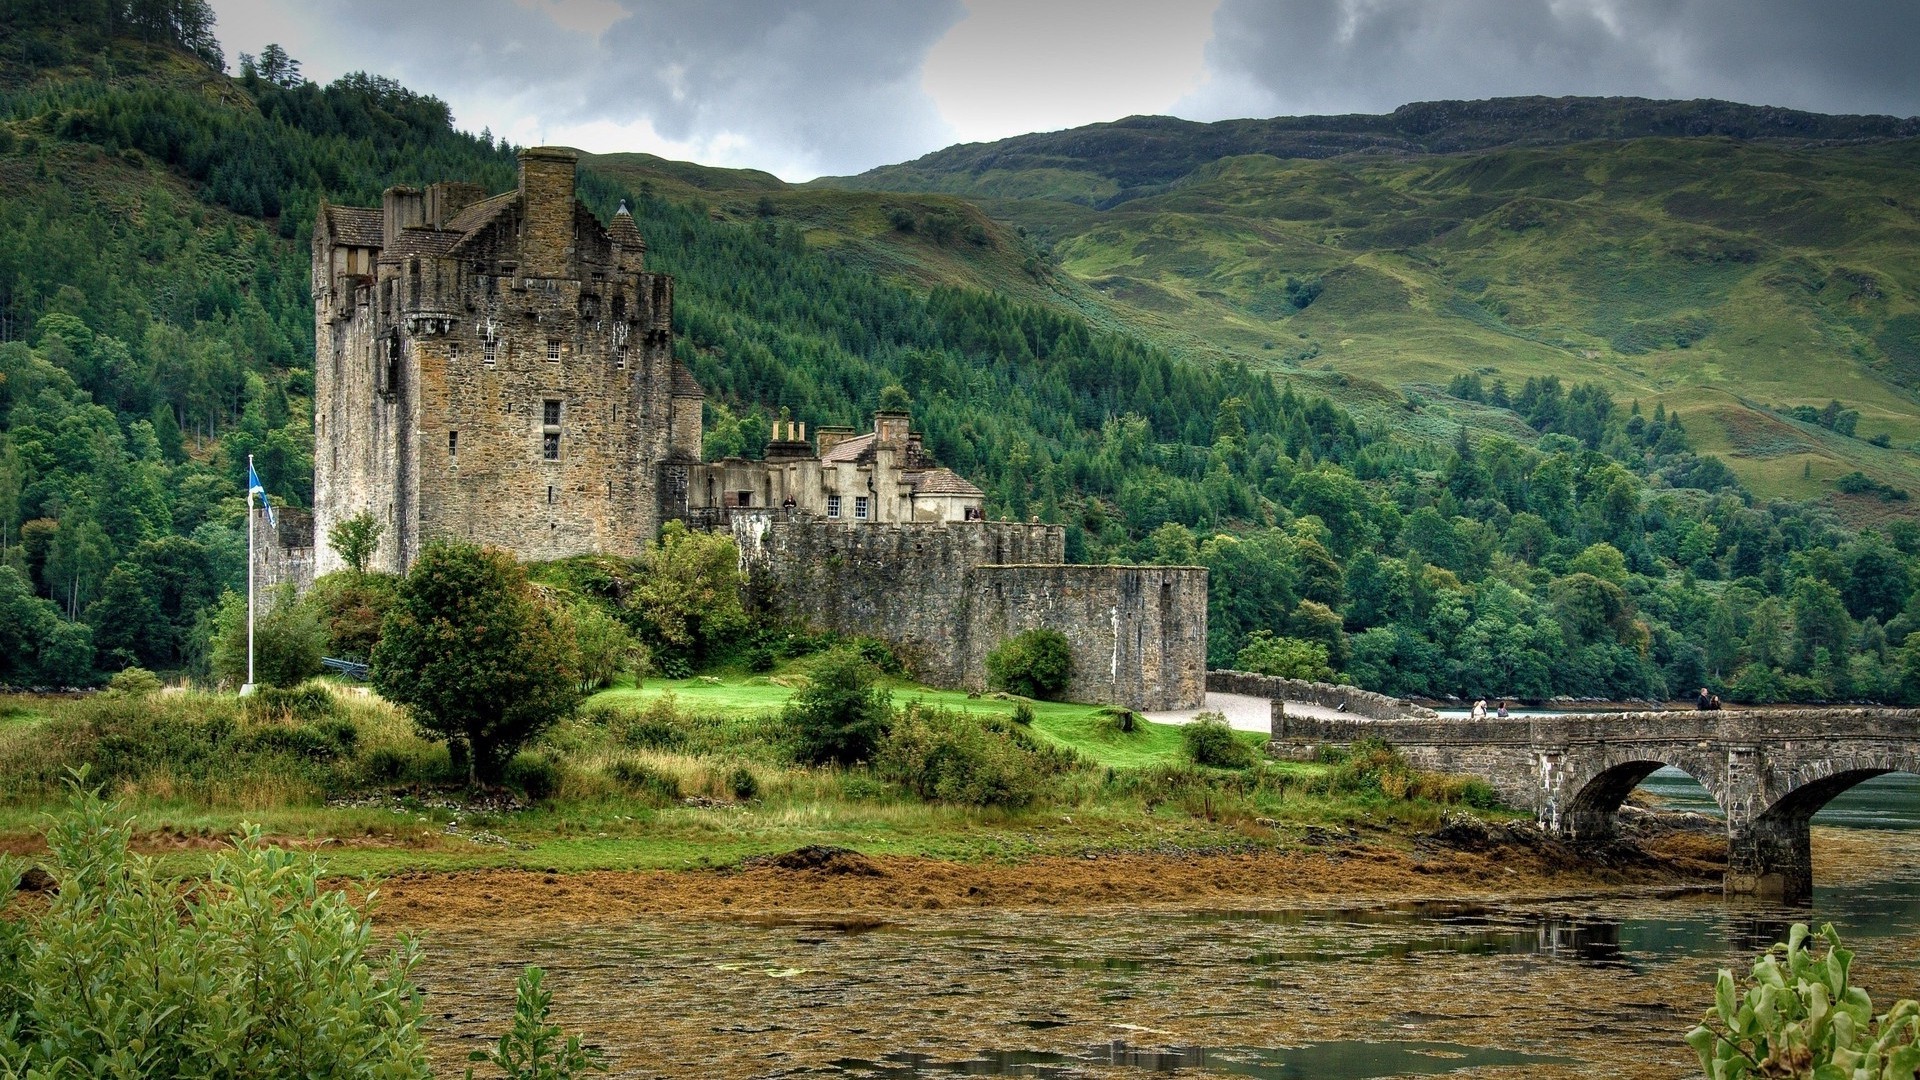 1920x1080 wallpapers: castle, mountains, forest, trees, lake, scotland, velocidad (image)